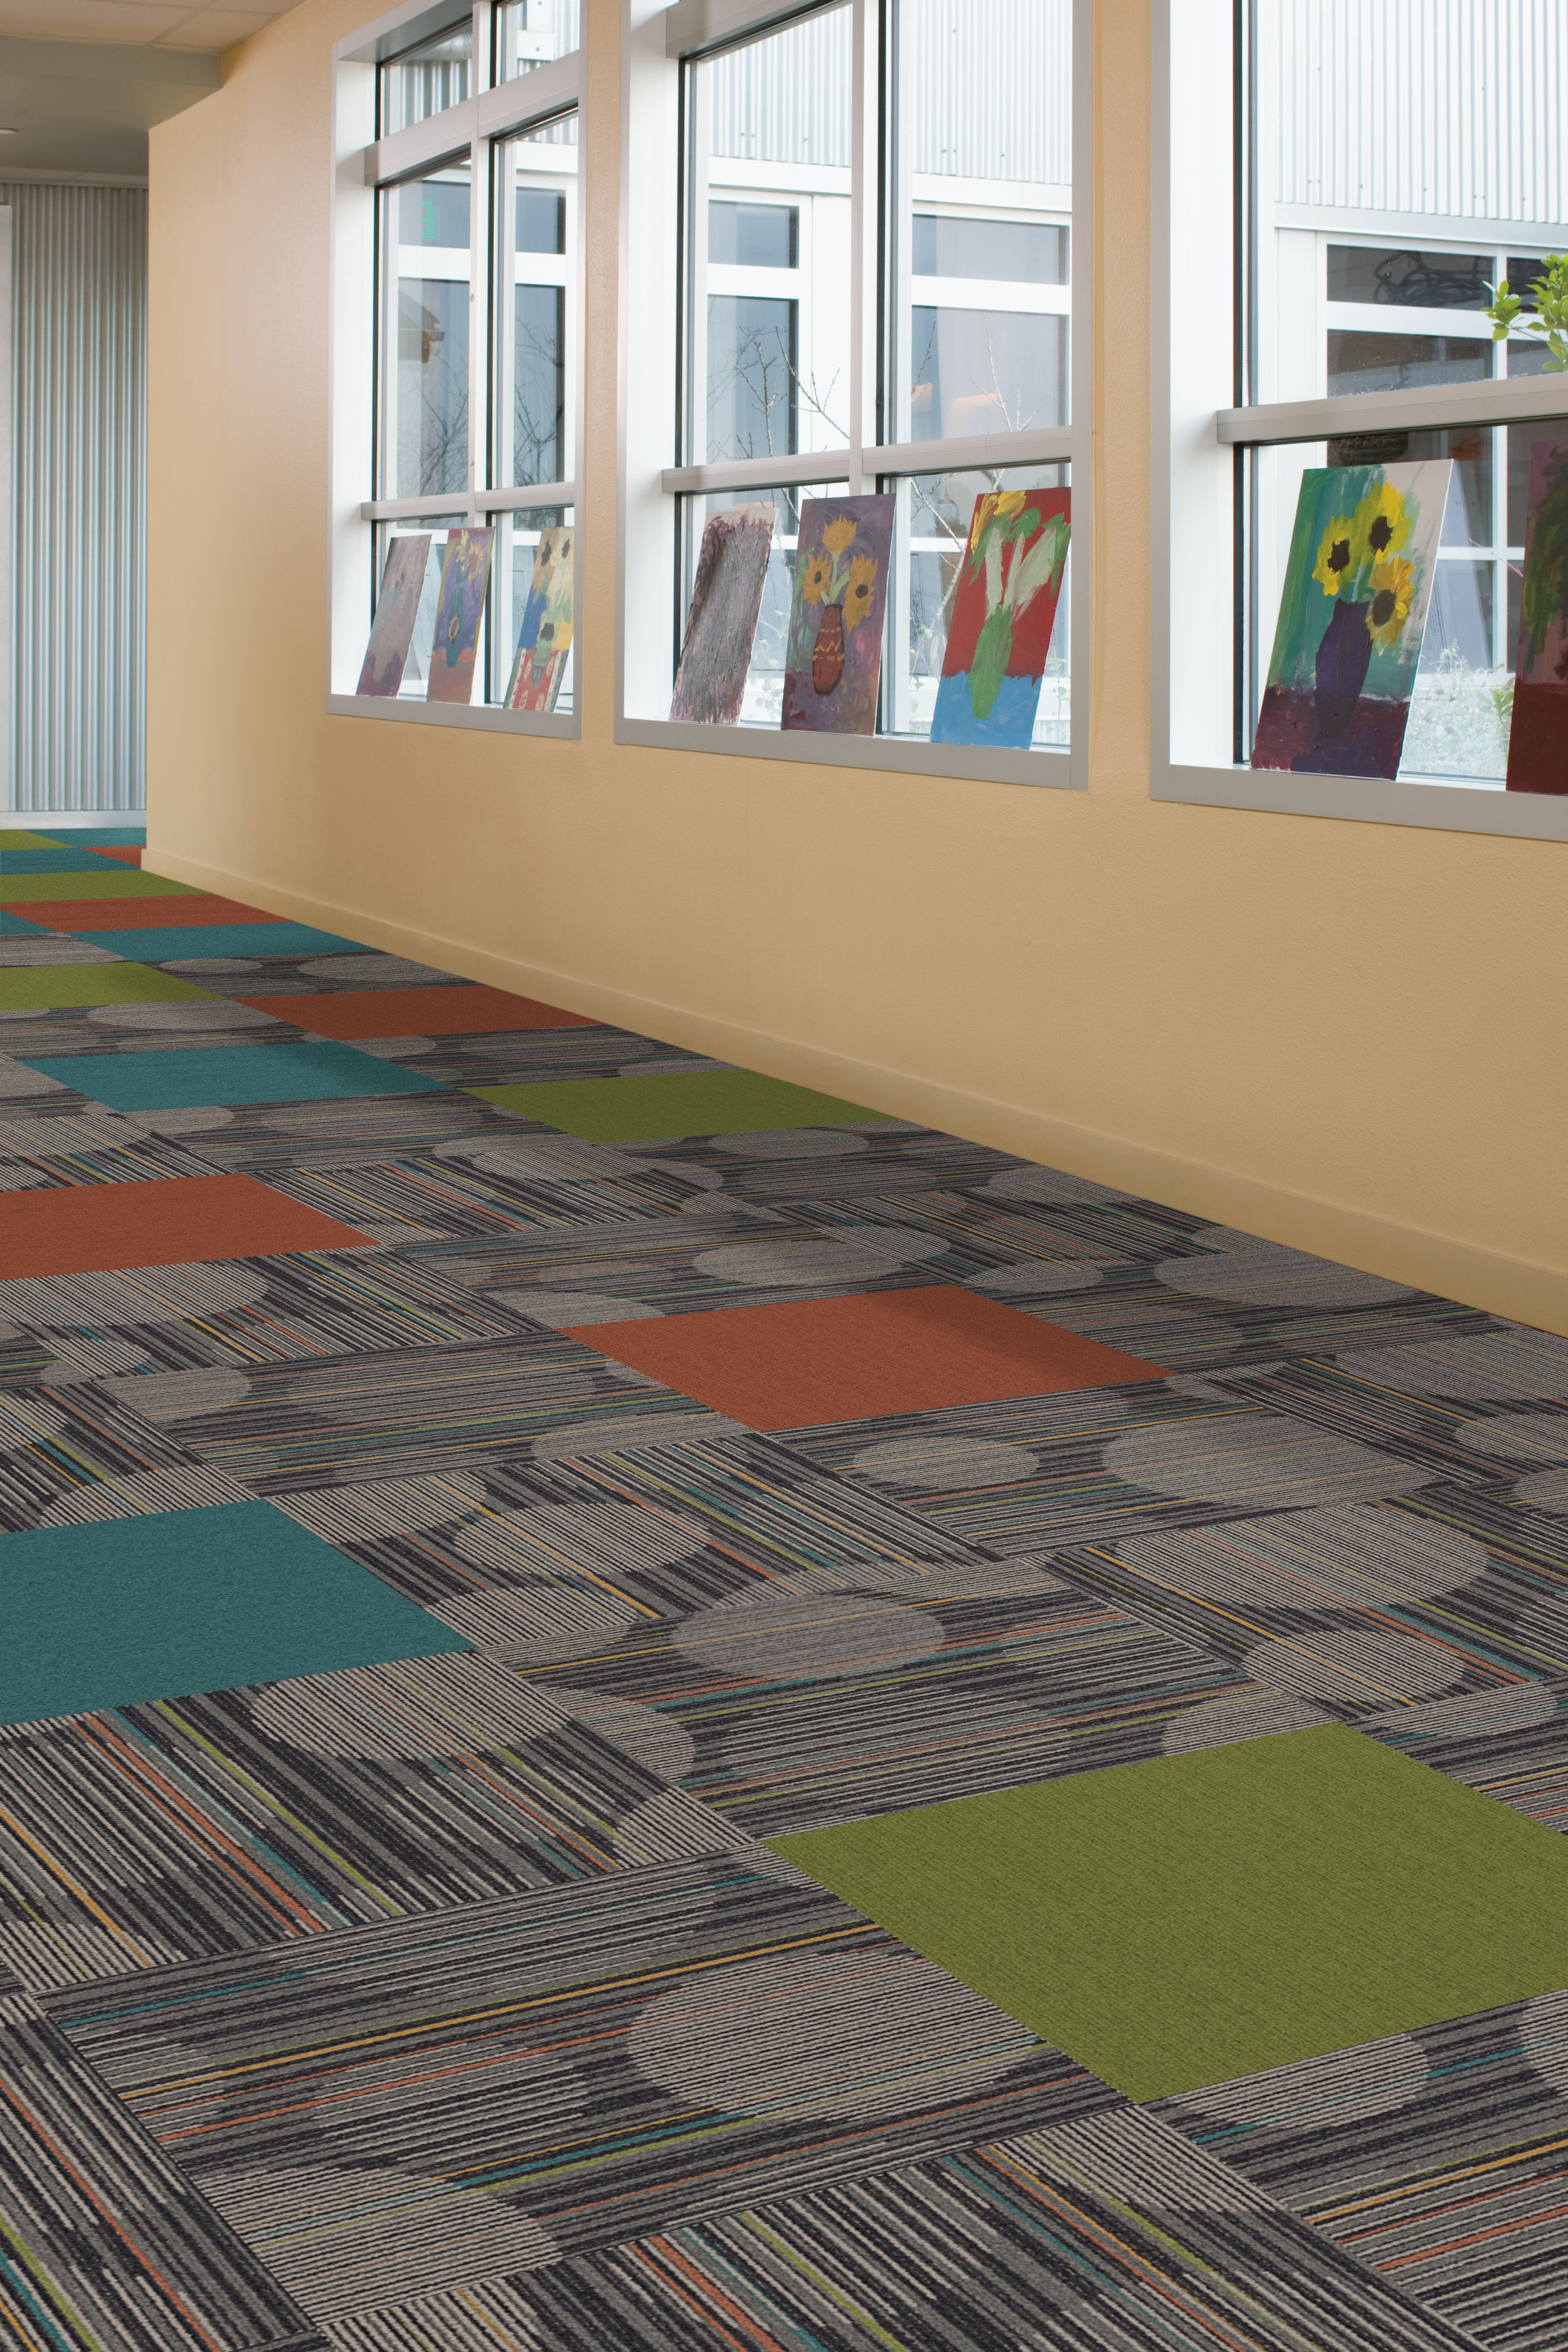 Interface Extra Curricular and Viva Colores carpet tiles in school hallway with student artwork in windows imagen número 2